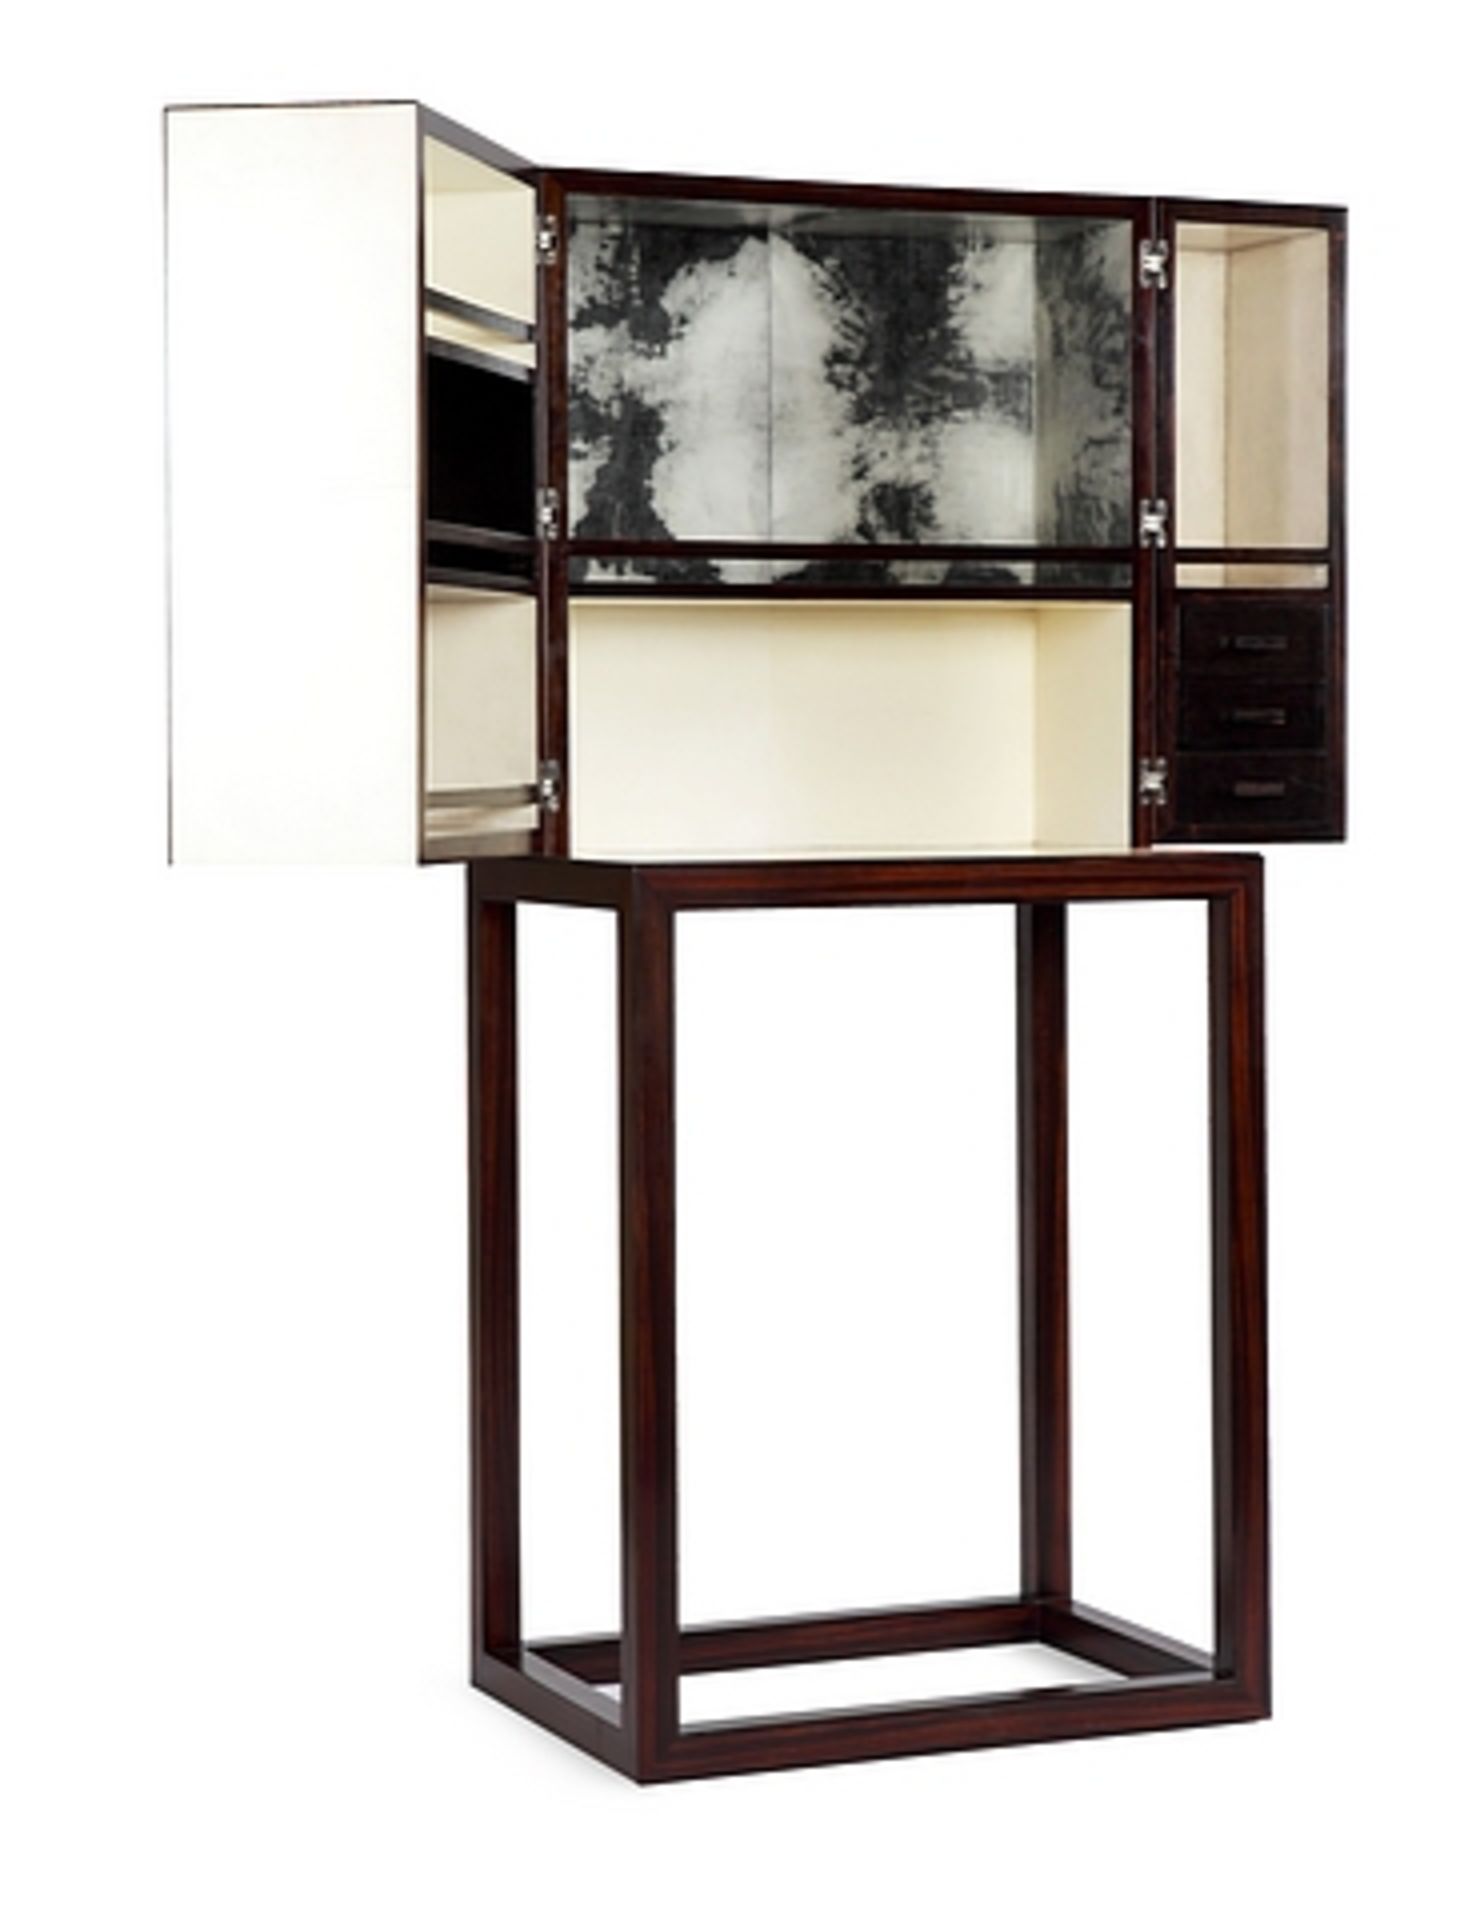 Bar Cabinet Elvin a stunning eye catching cabinet the panelled doors hand crafted in light - Image 4 of 5